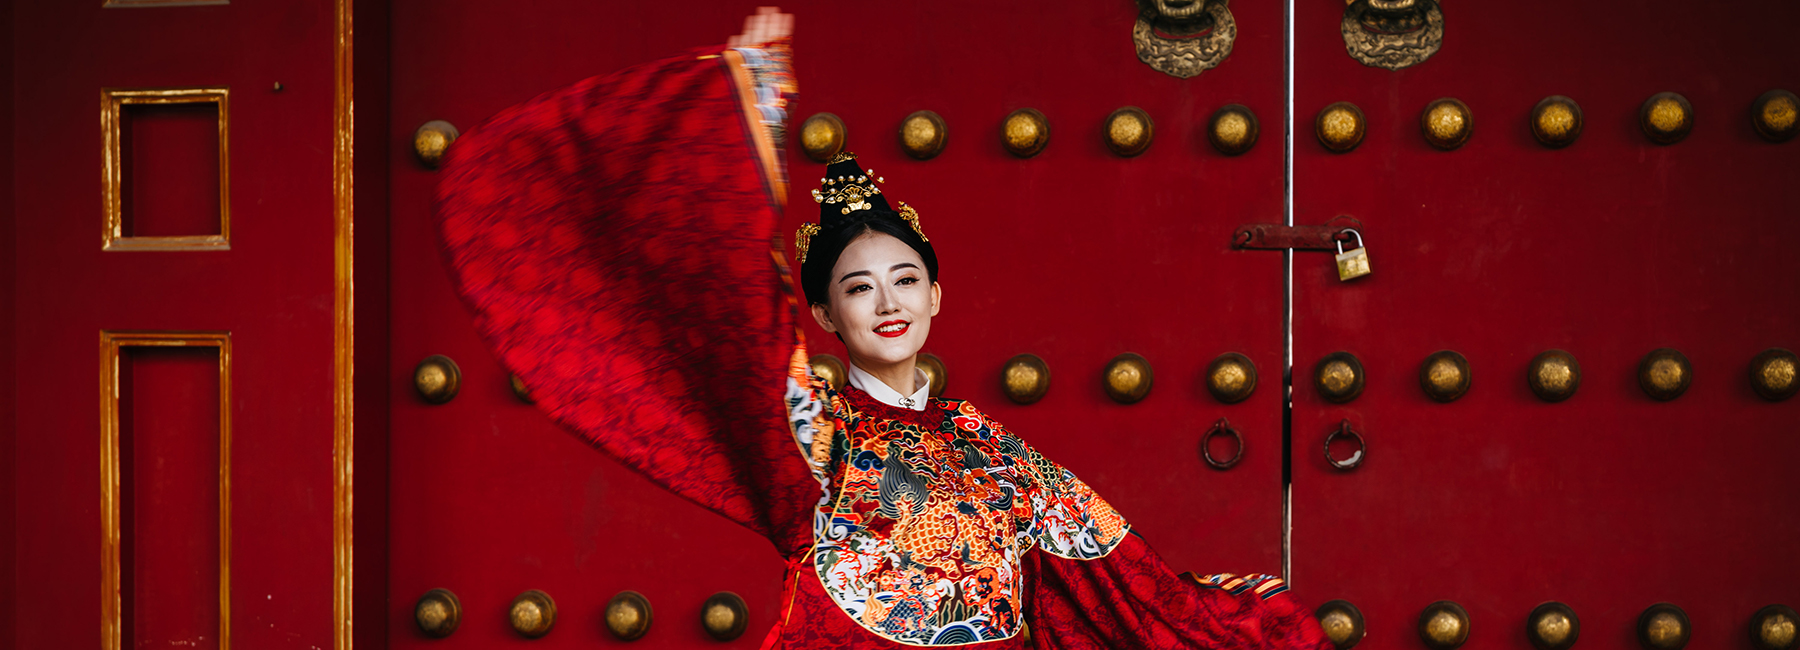 A young woman in a predominantly red traditional Chinese robe dances in front of a red and gold wall.